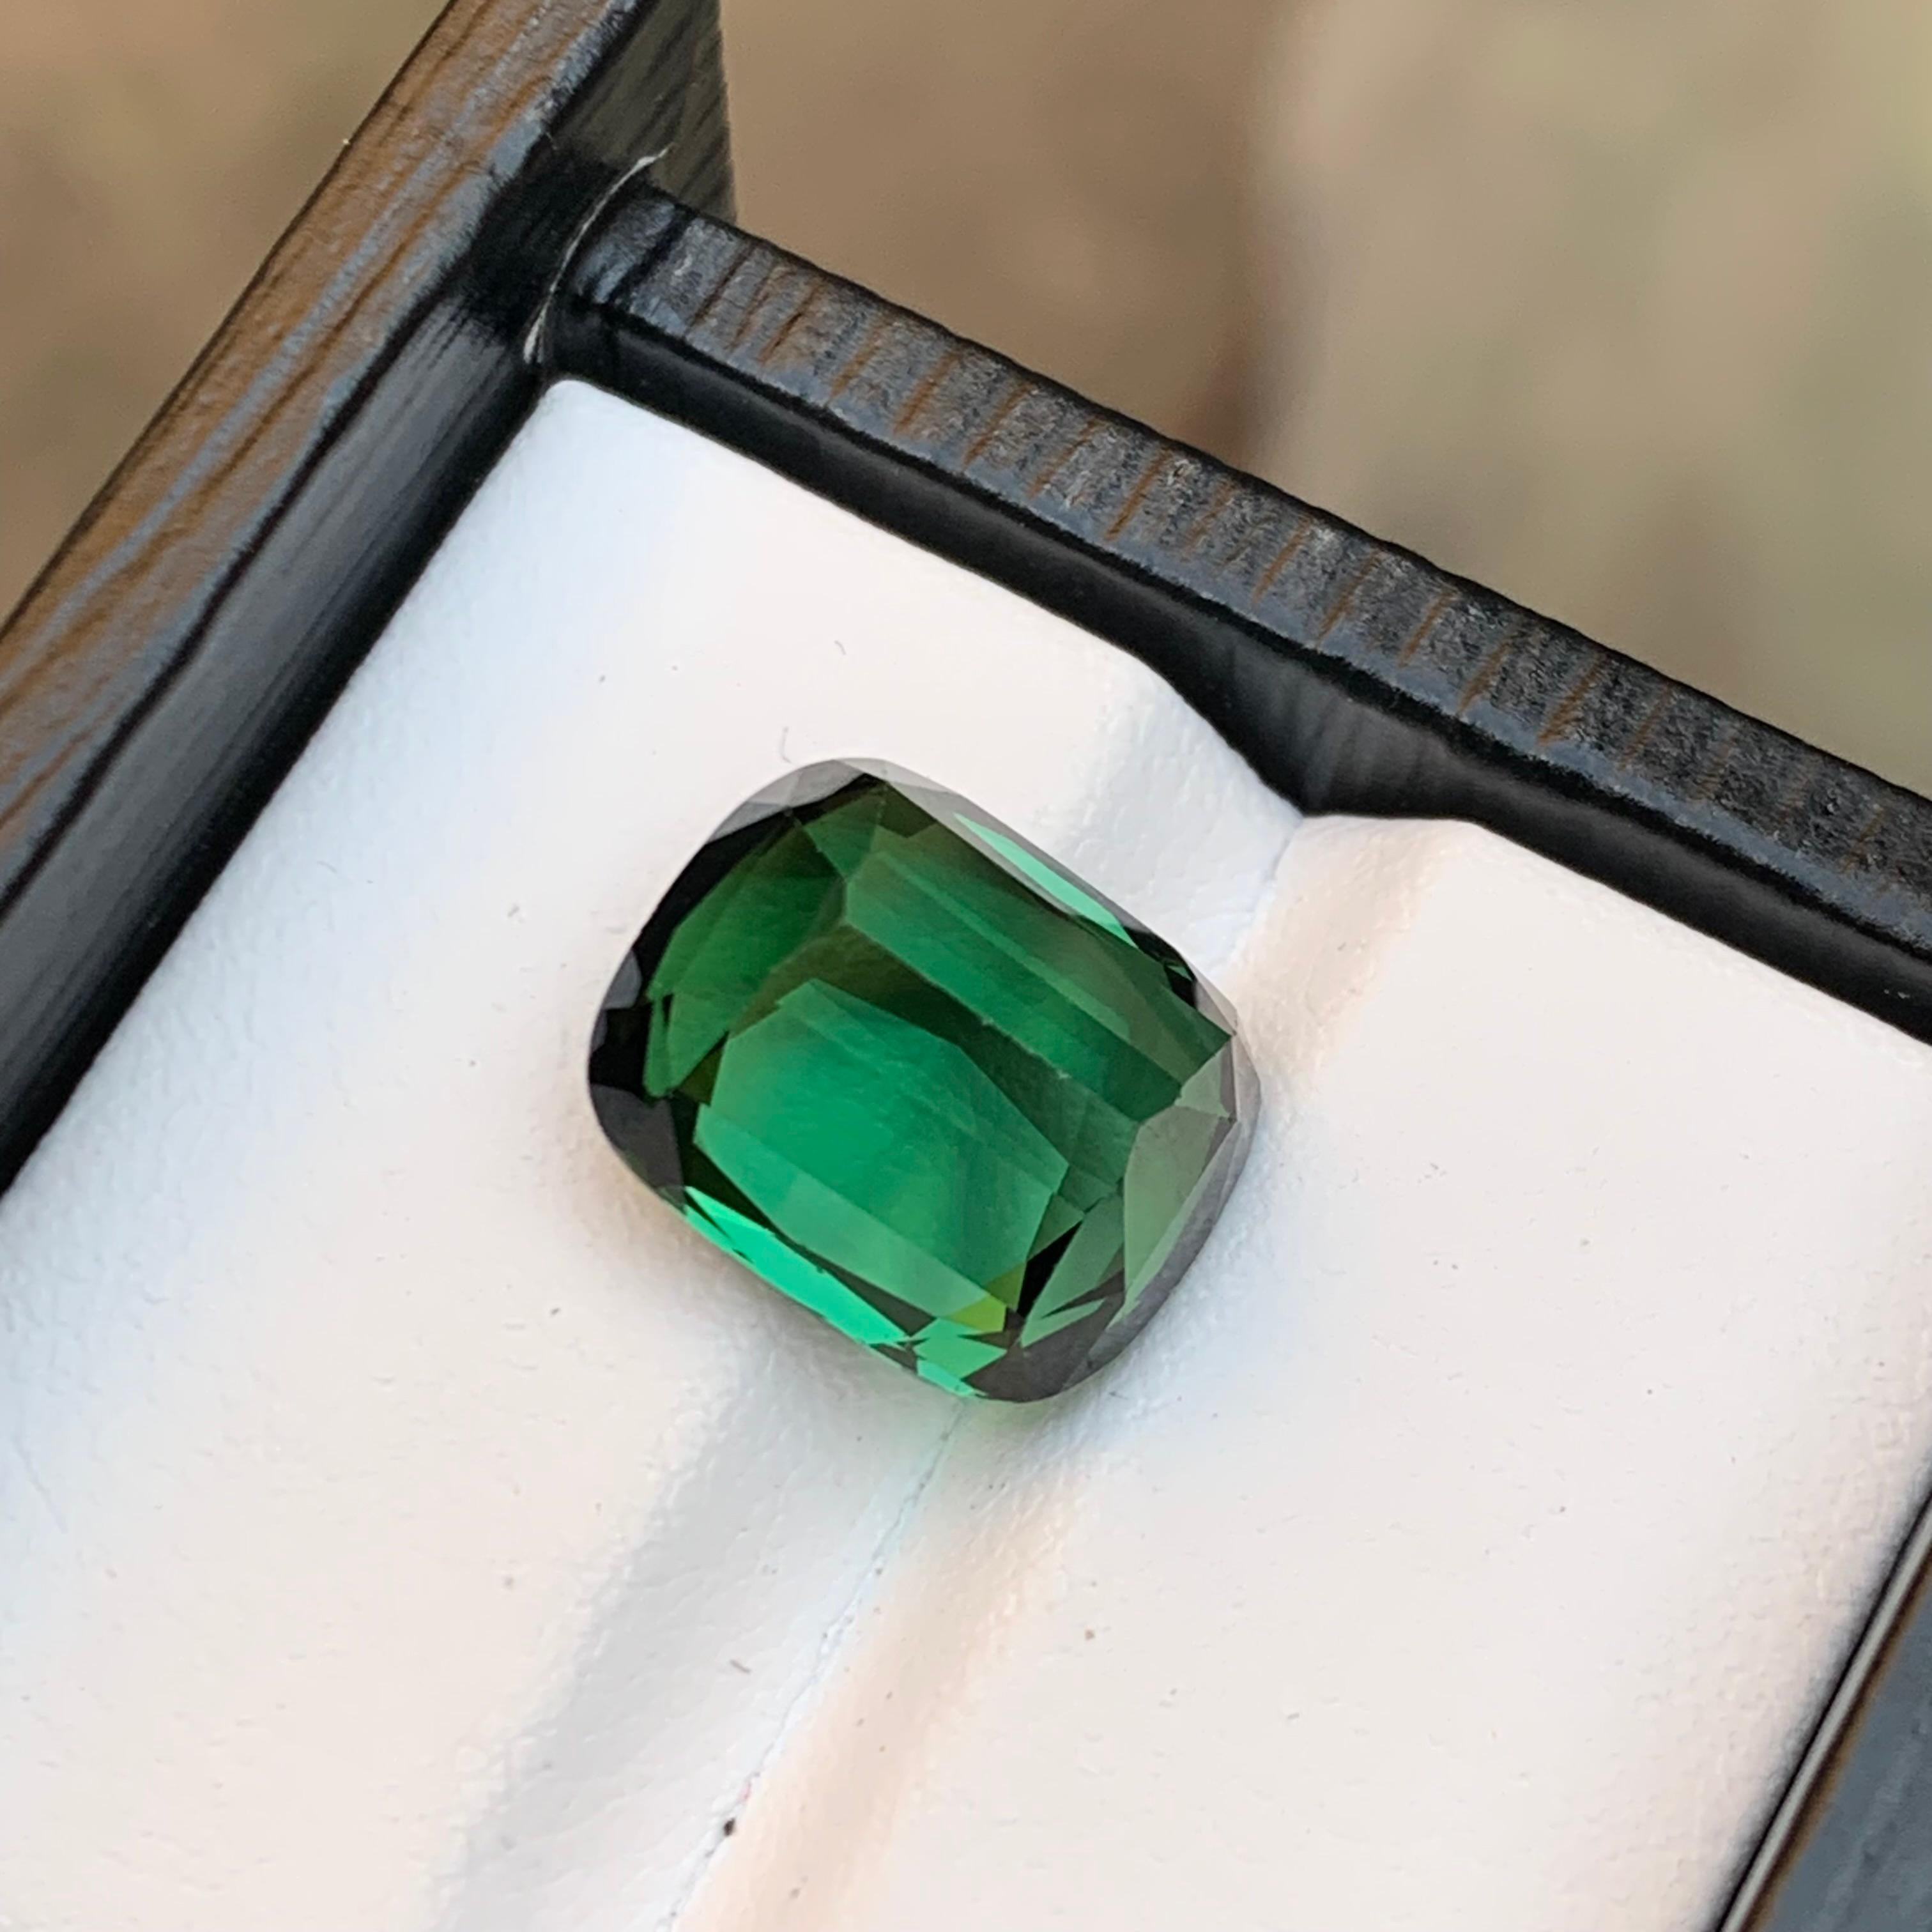 Rare Green Natural Tourmaline Gemstone, 7.65 Ct Cushion Cut for a Ring/Pendant For Sale 3